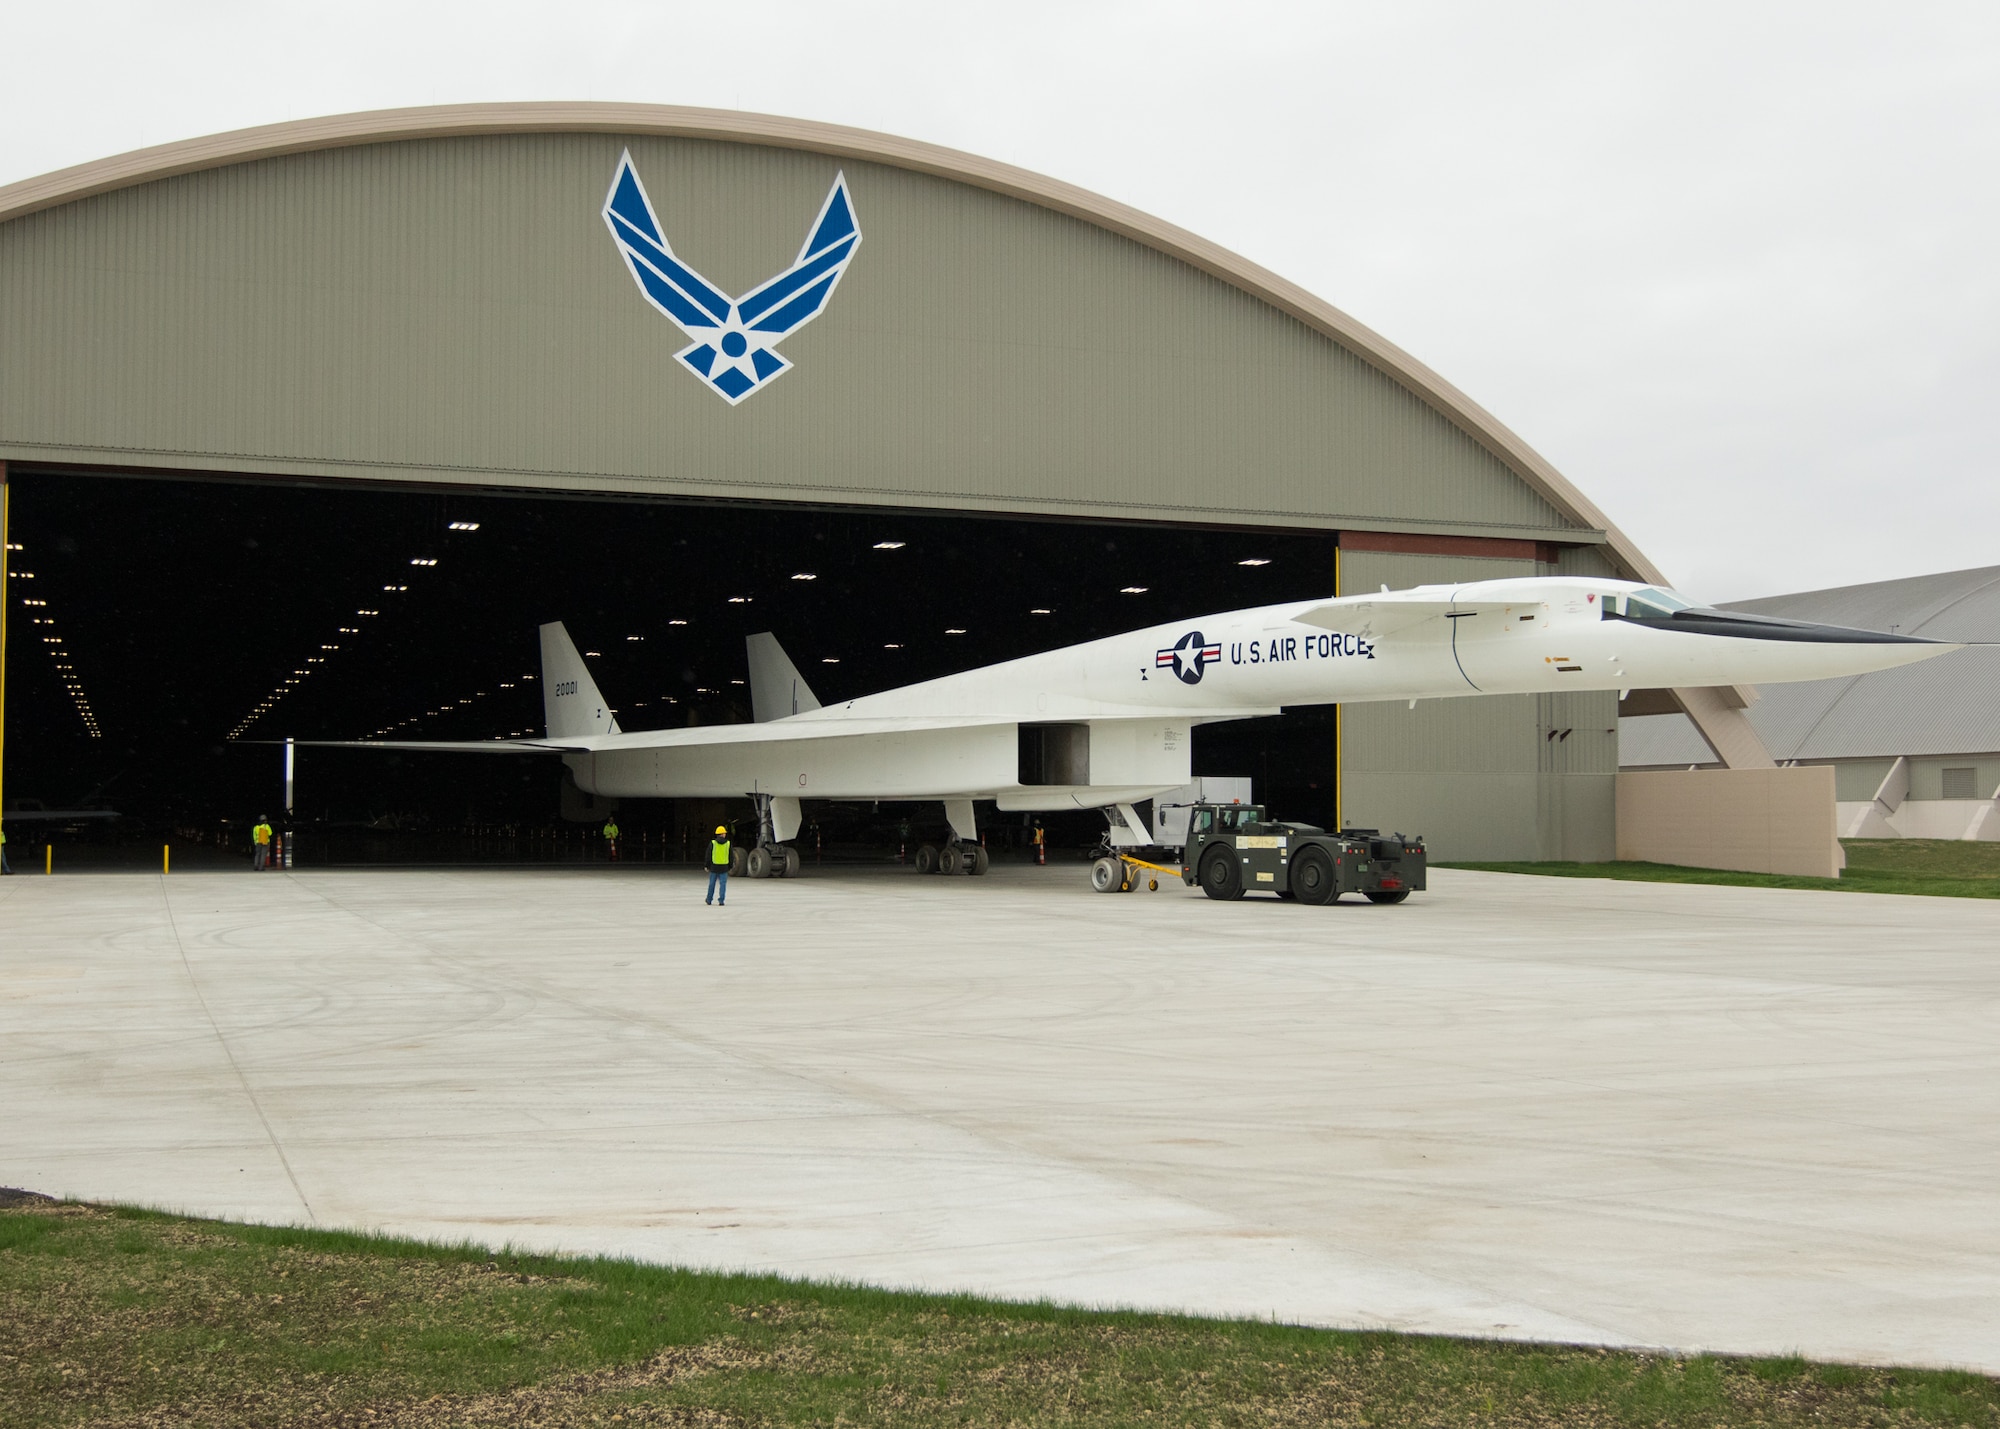 Restoration staff move the North American XB-70 Valkyrie into the new fourth building at the National Museum of the U.S. Air Force on Oct. 27, 2015. (U.S. Air Force photo by Don Popp)